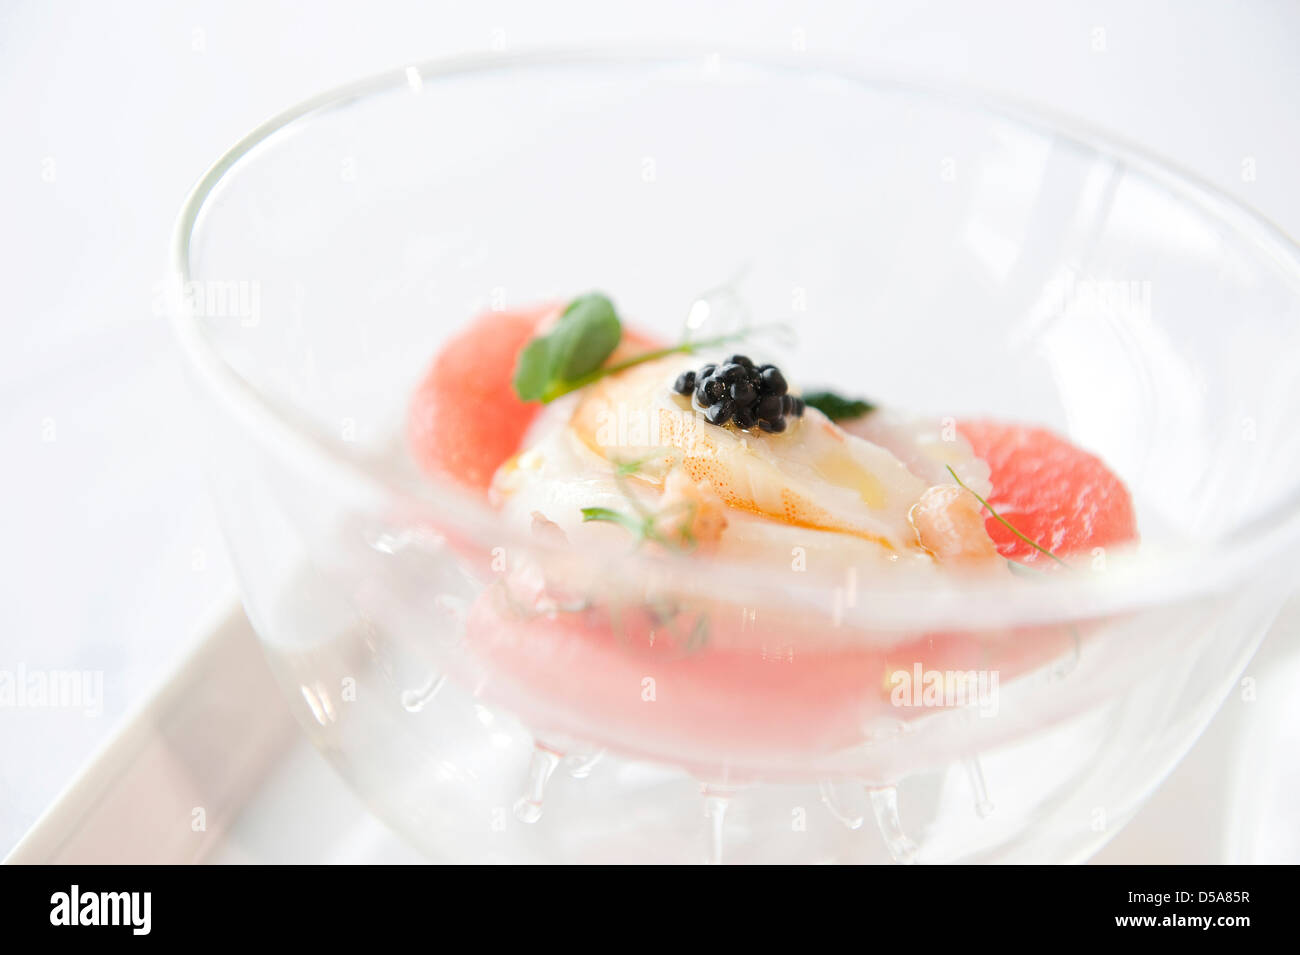 lobster, caviar and pink grapefruit, first course seafood starter Stock Photo